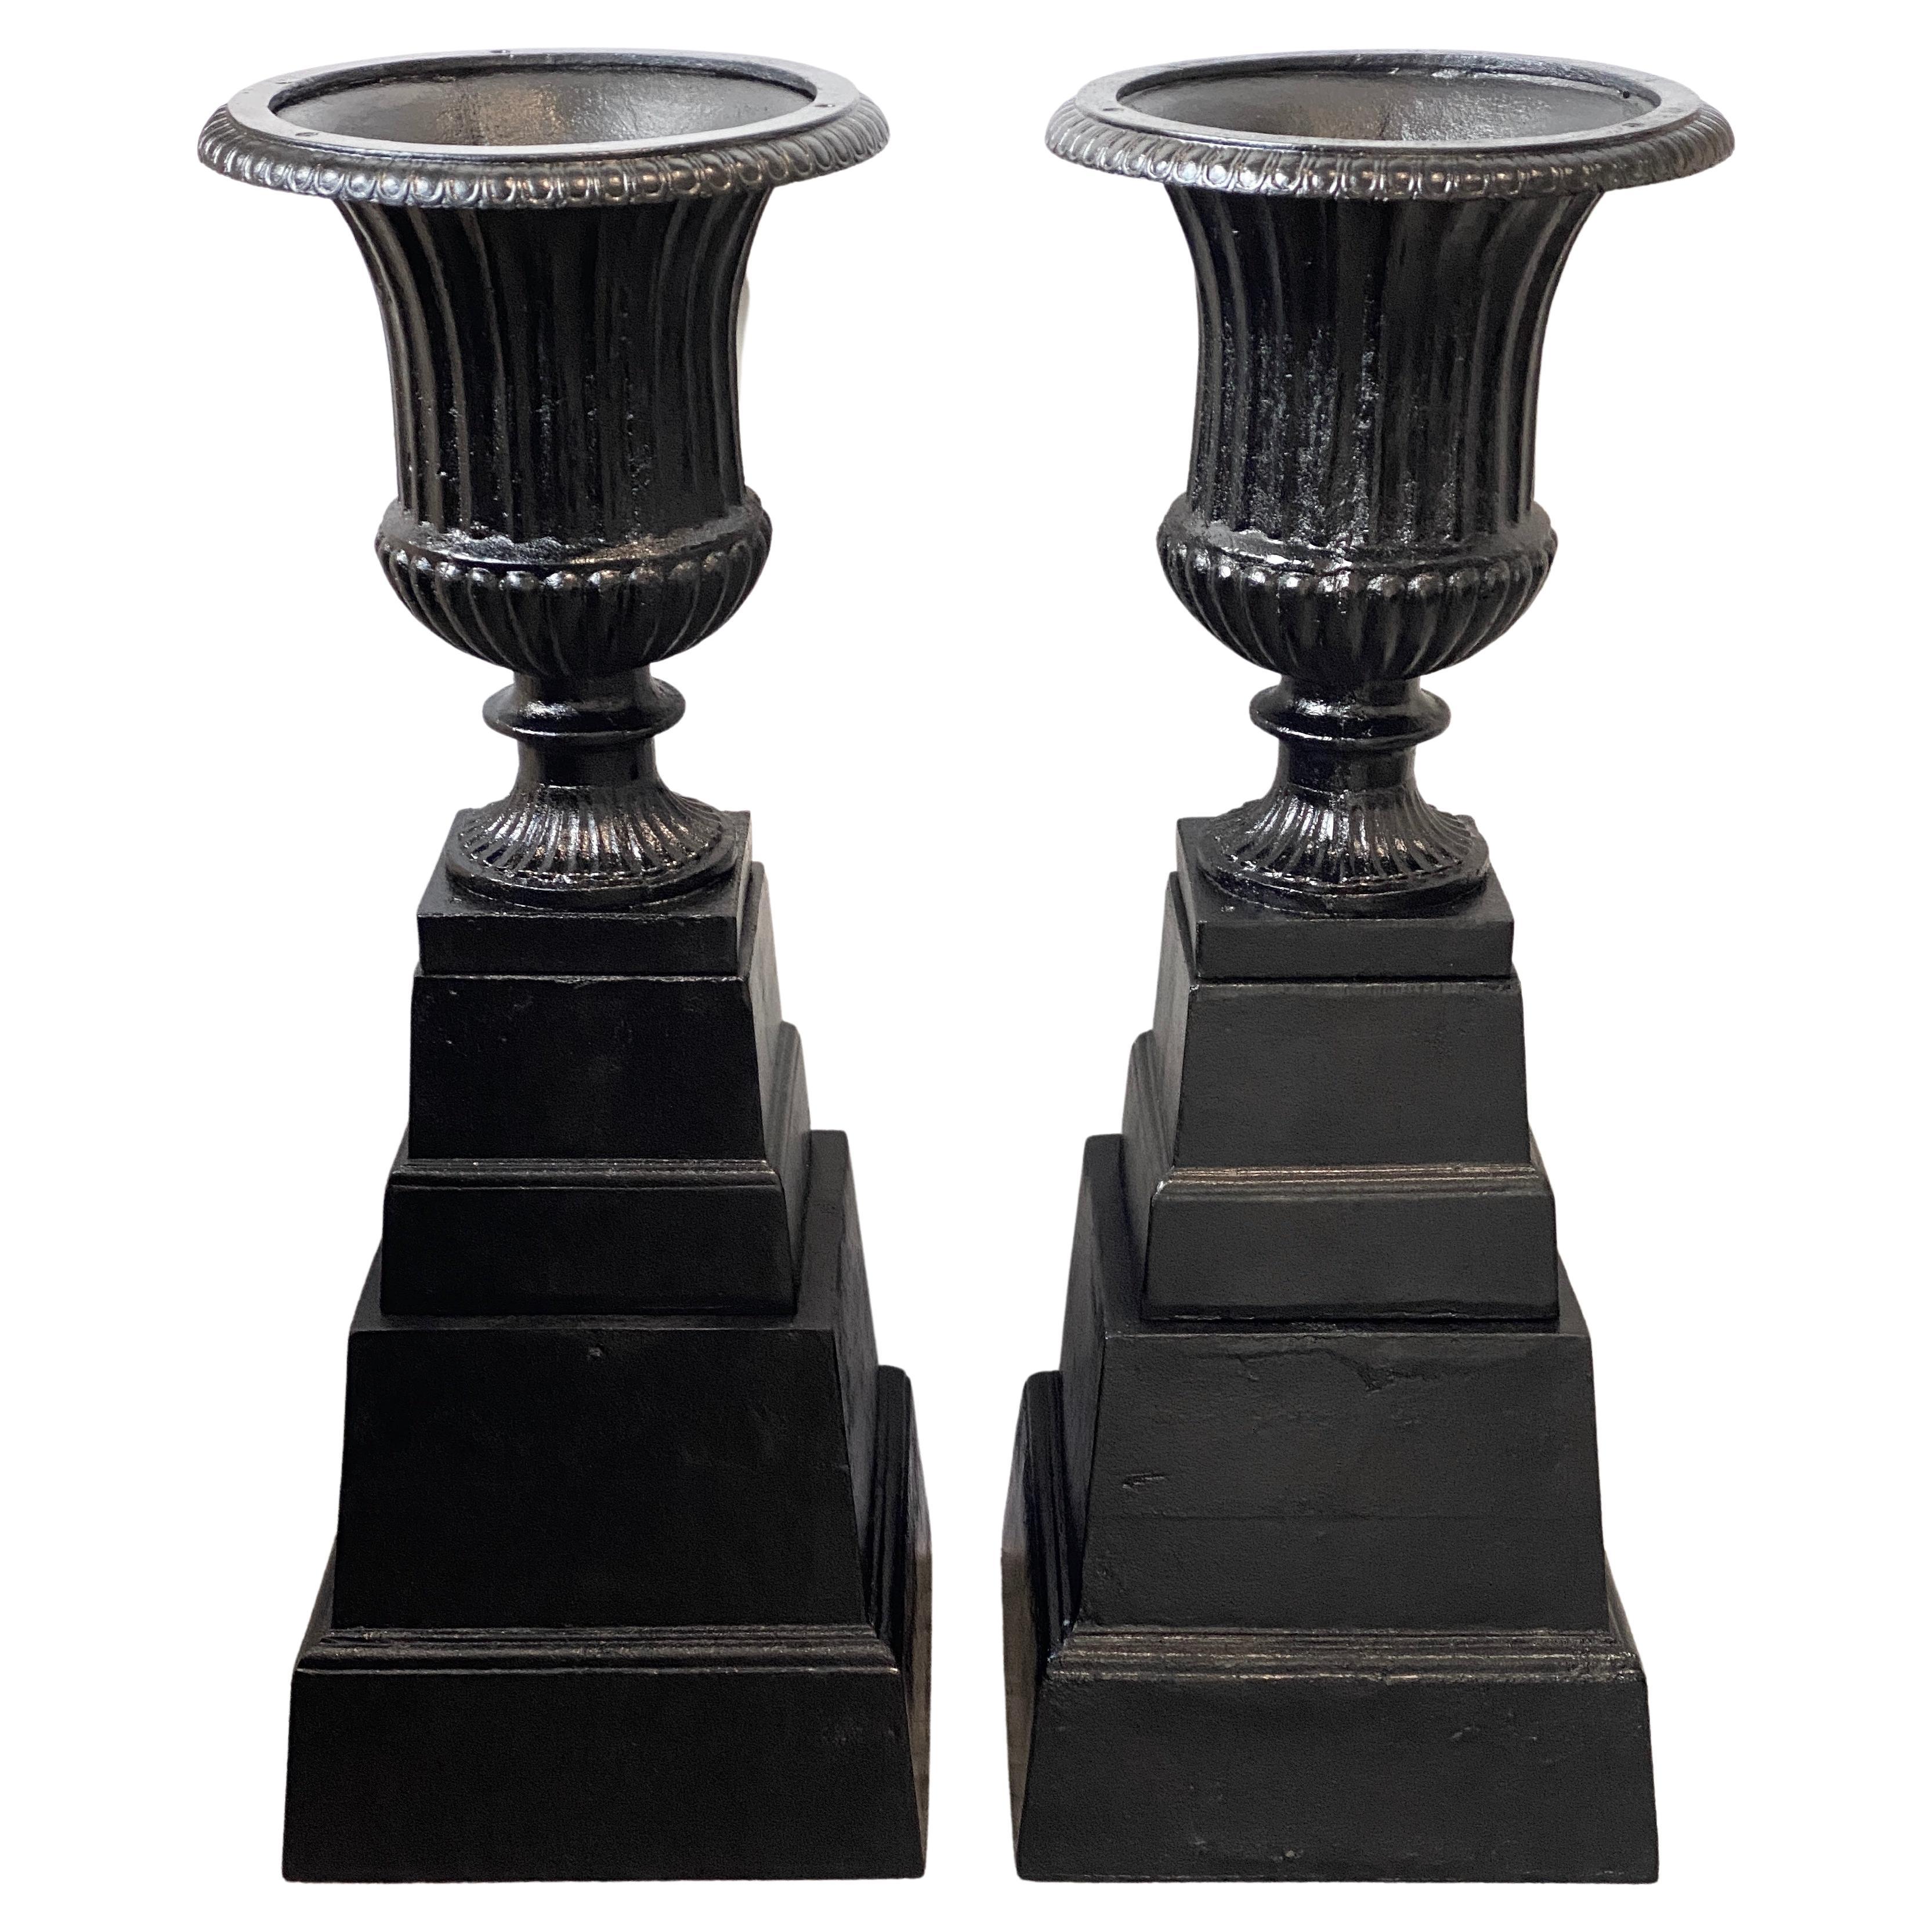 Pair of Regency Style Garden Urns on Stand For Sale